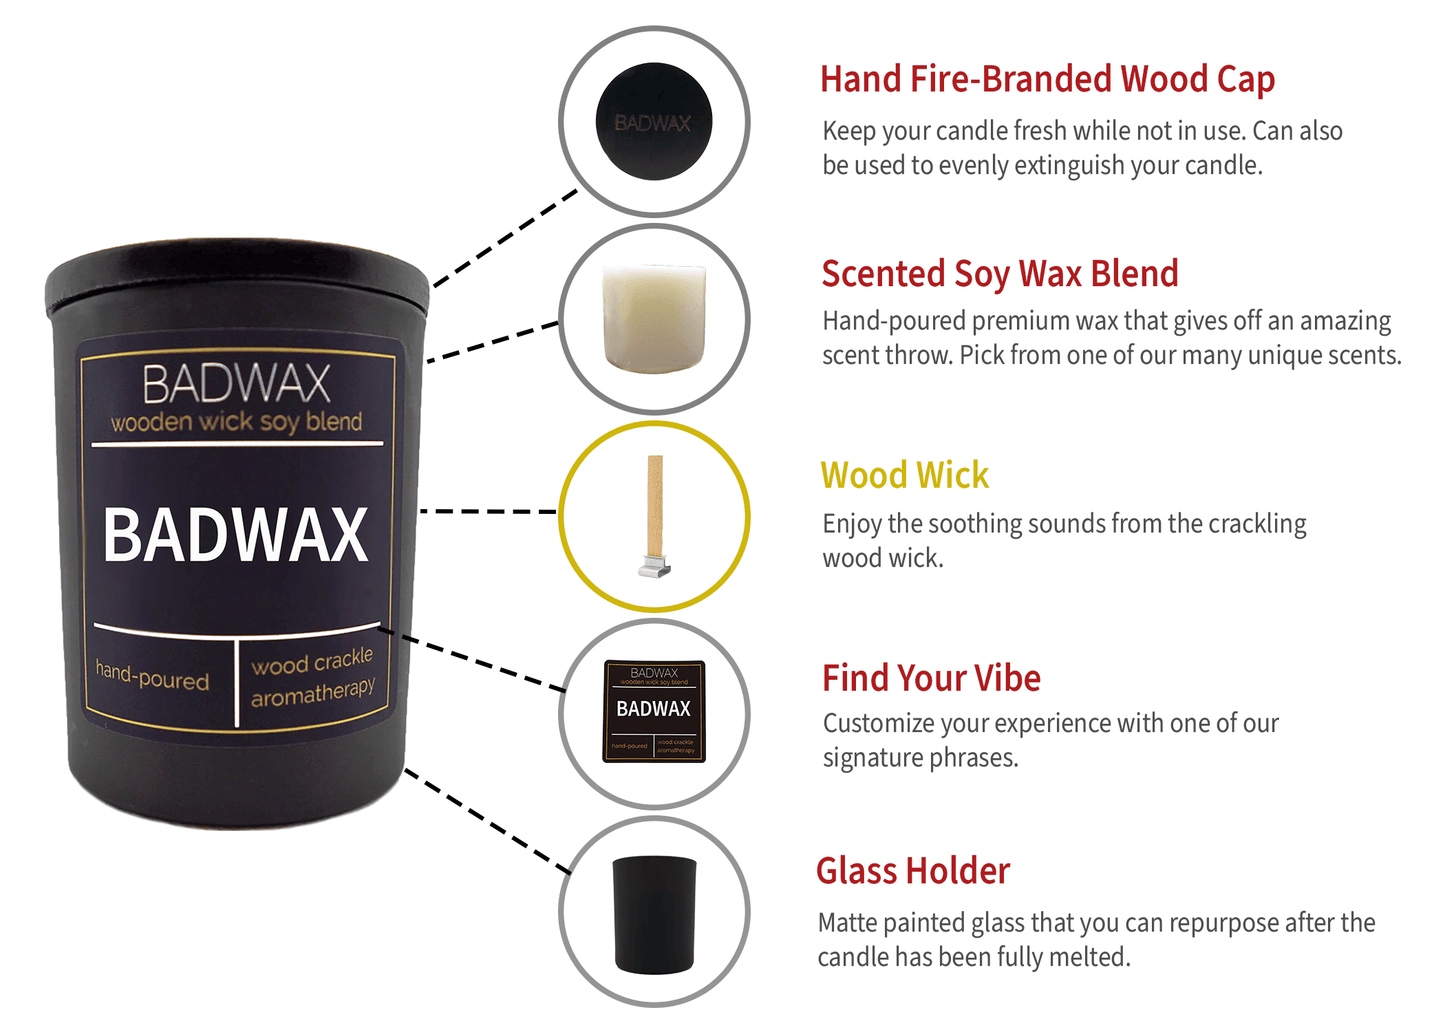 I Like it…In The Butt - Woodwick Candle - BADWAX